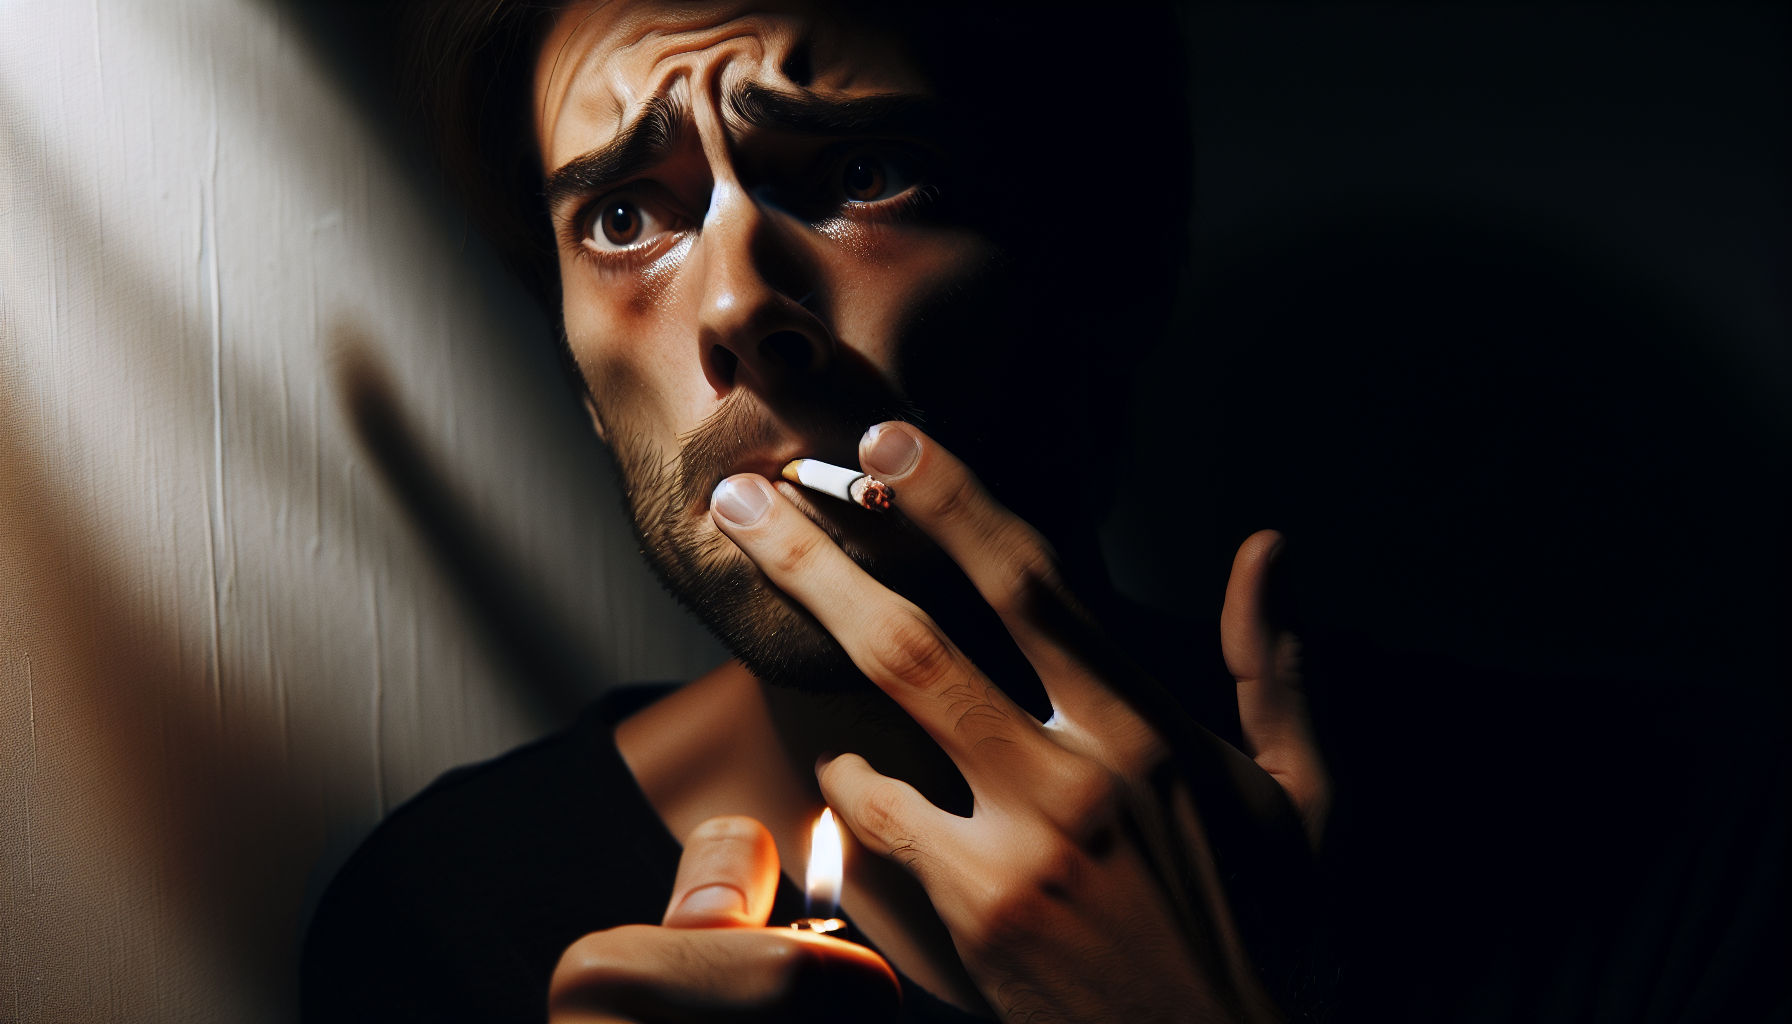 A person holding a cigarette with a concerned expression